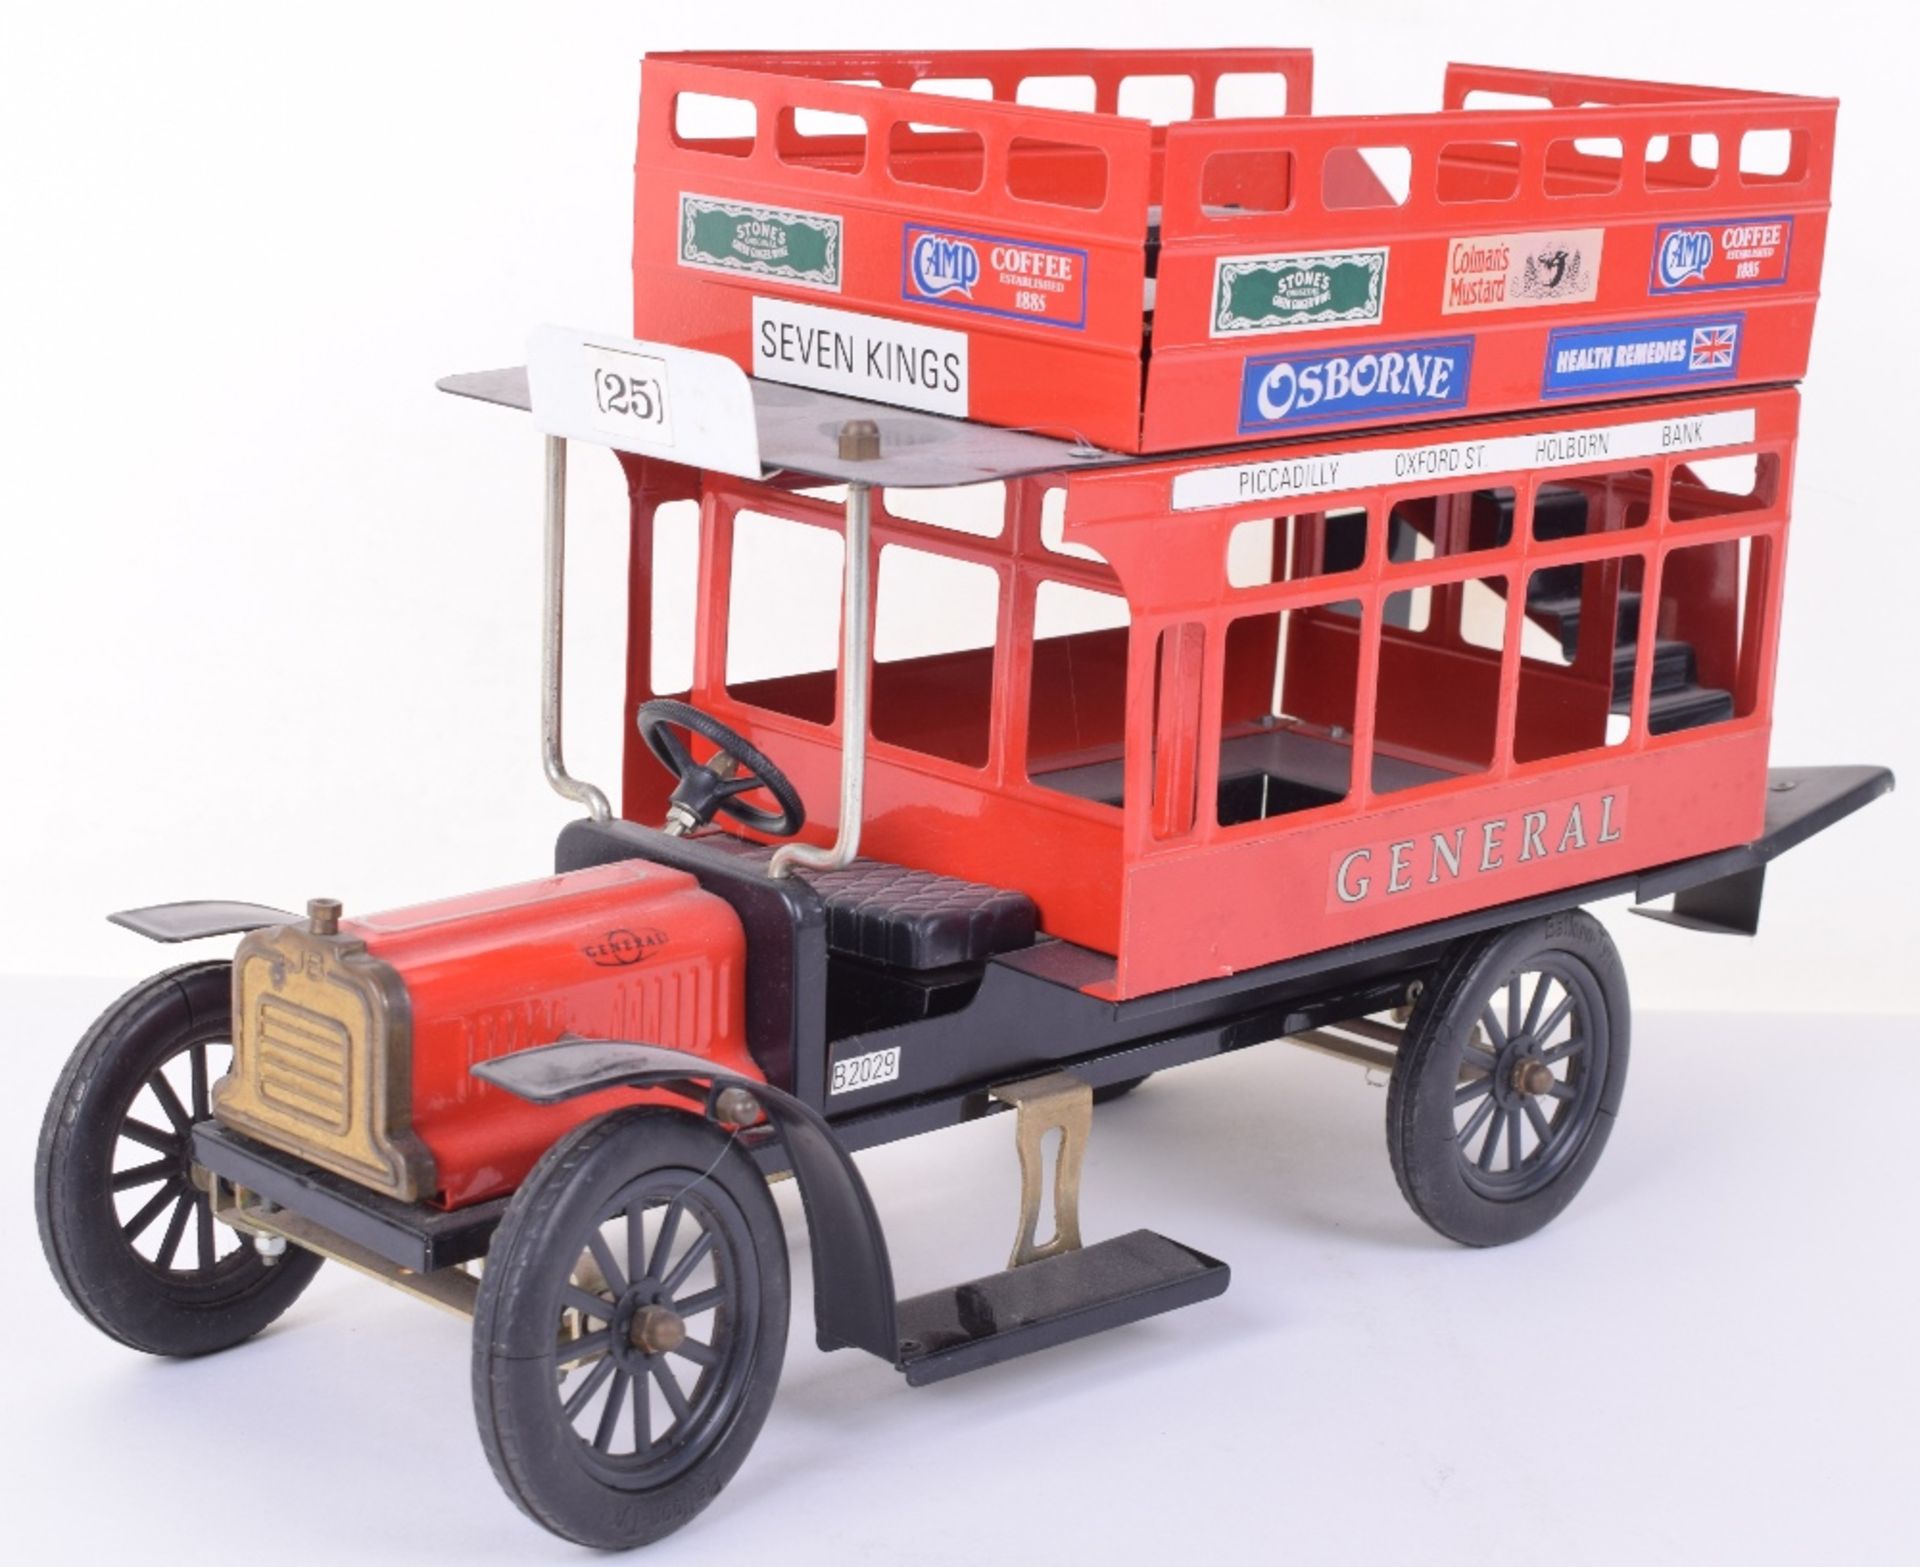 A tinplate open top General bus by JB, - Image 2 of 3